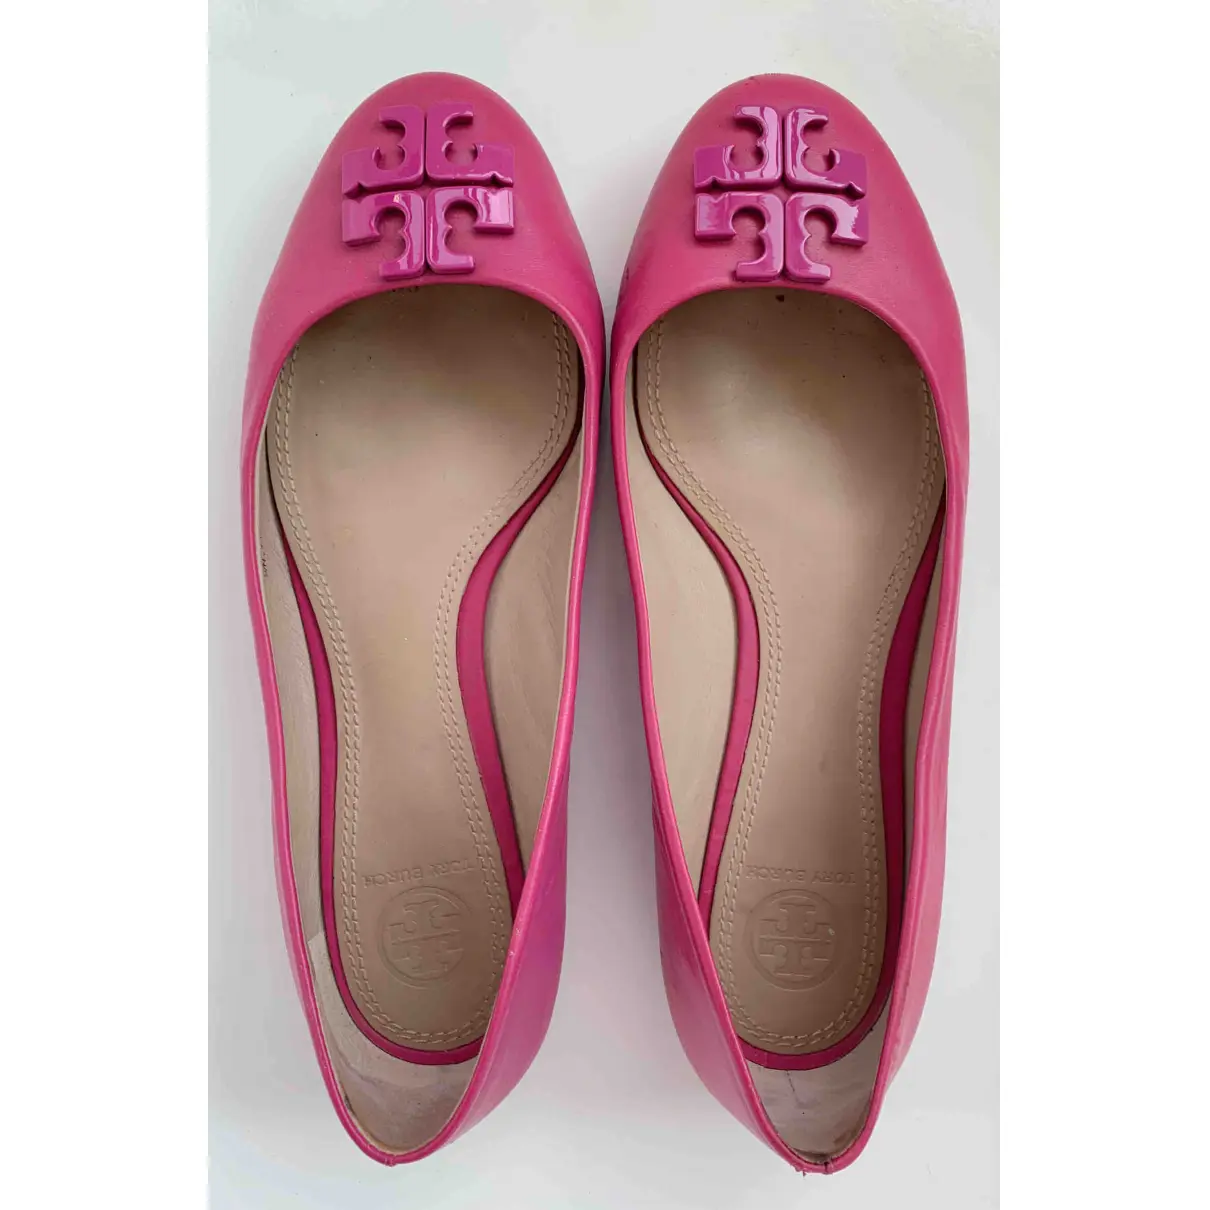 Buy Tory Burch Leather flats online